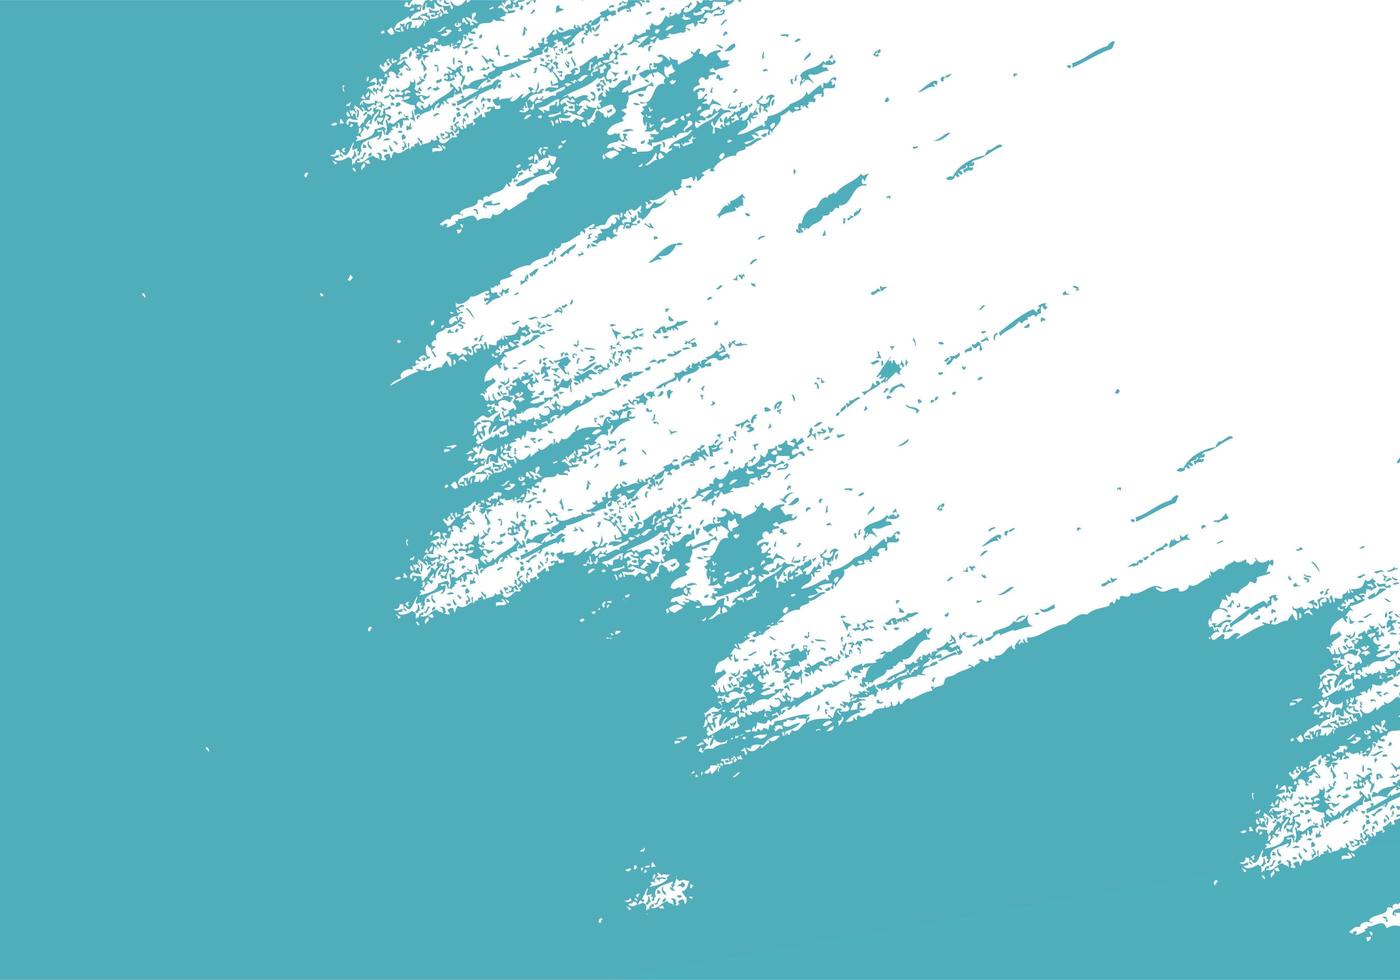 Grungy Teal Ink Brushstroke Texture vector